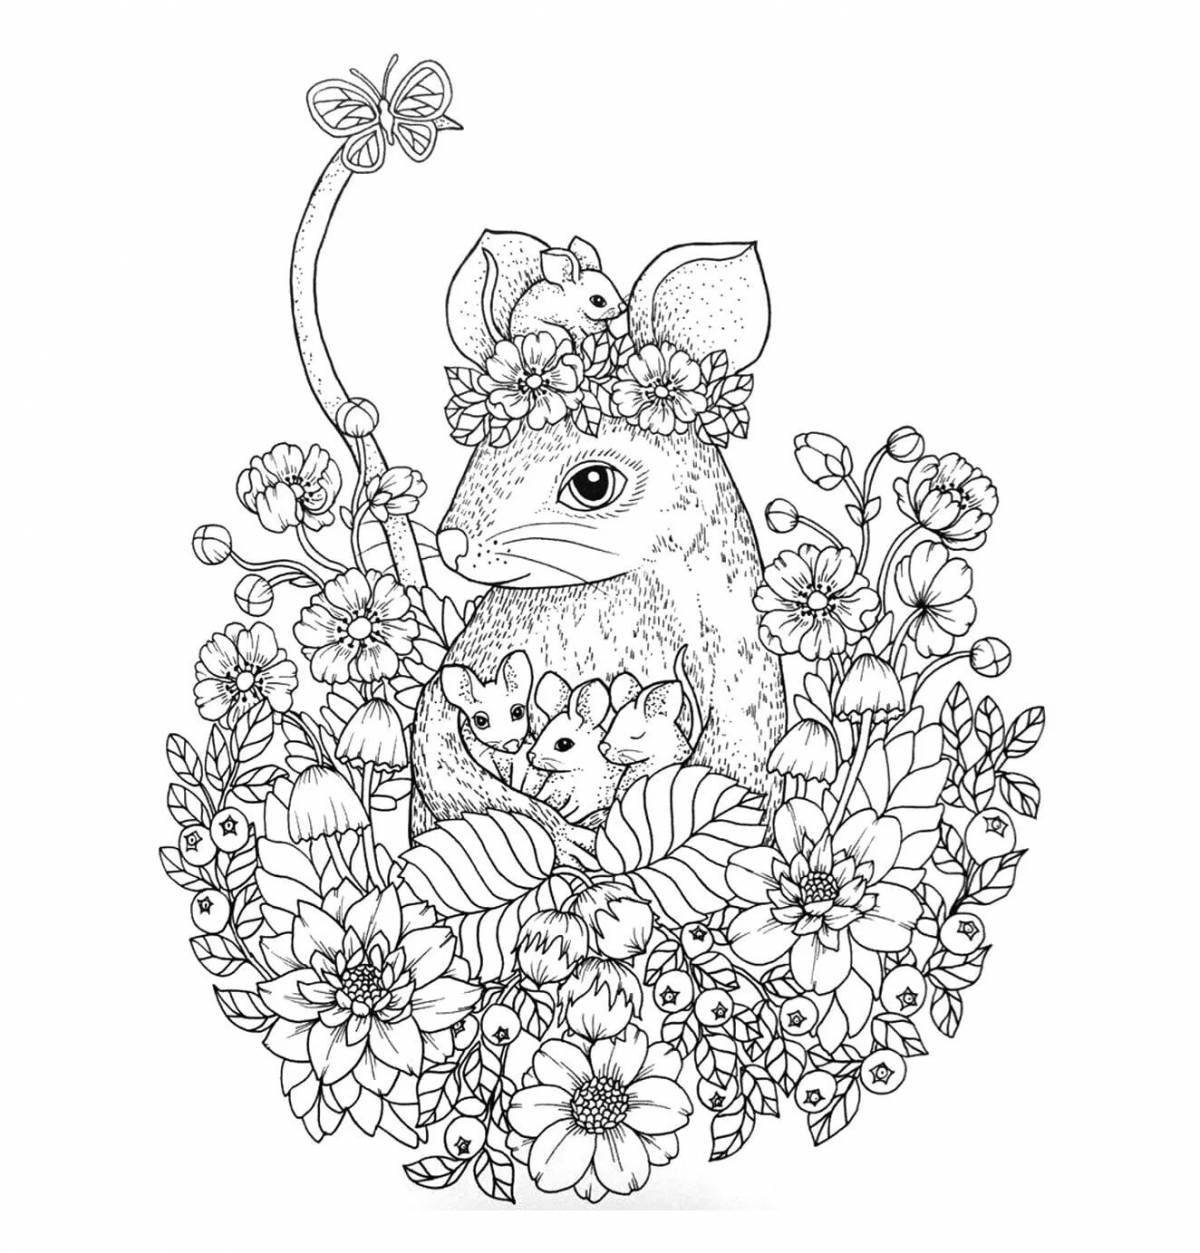 Soothing cute coloring book